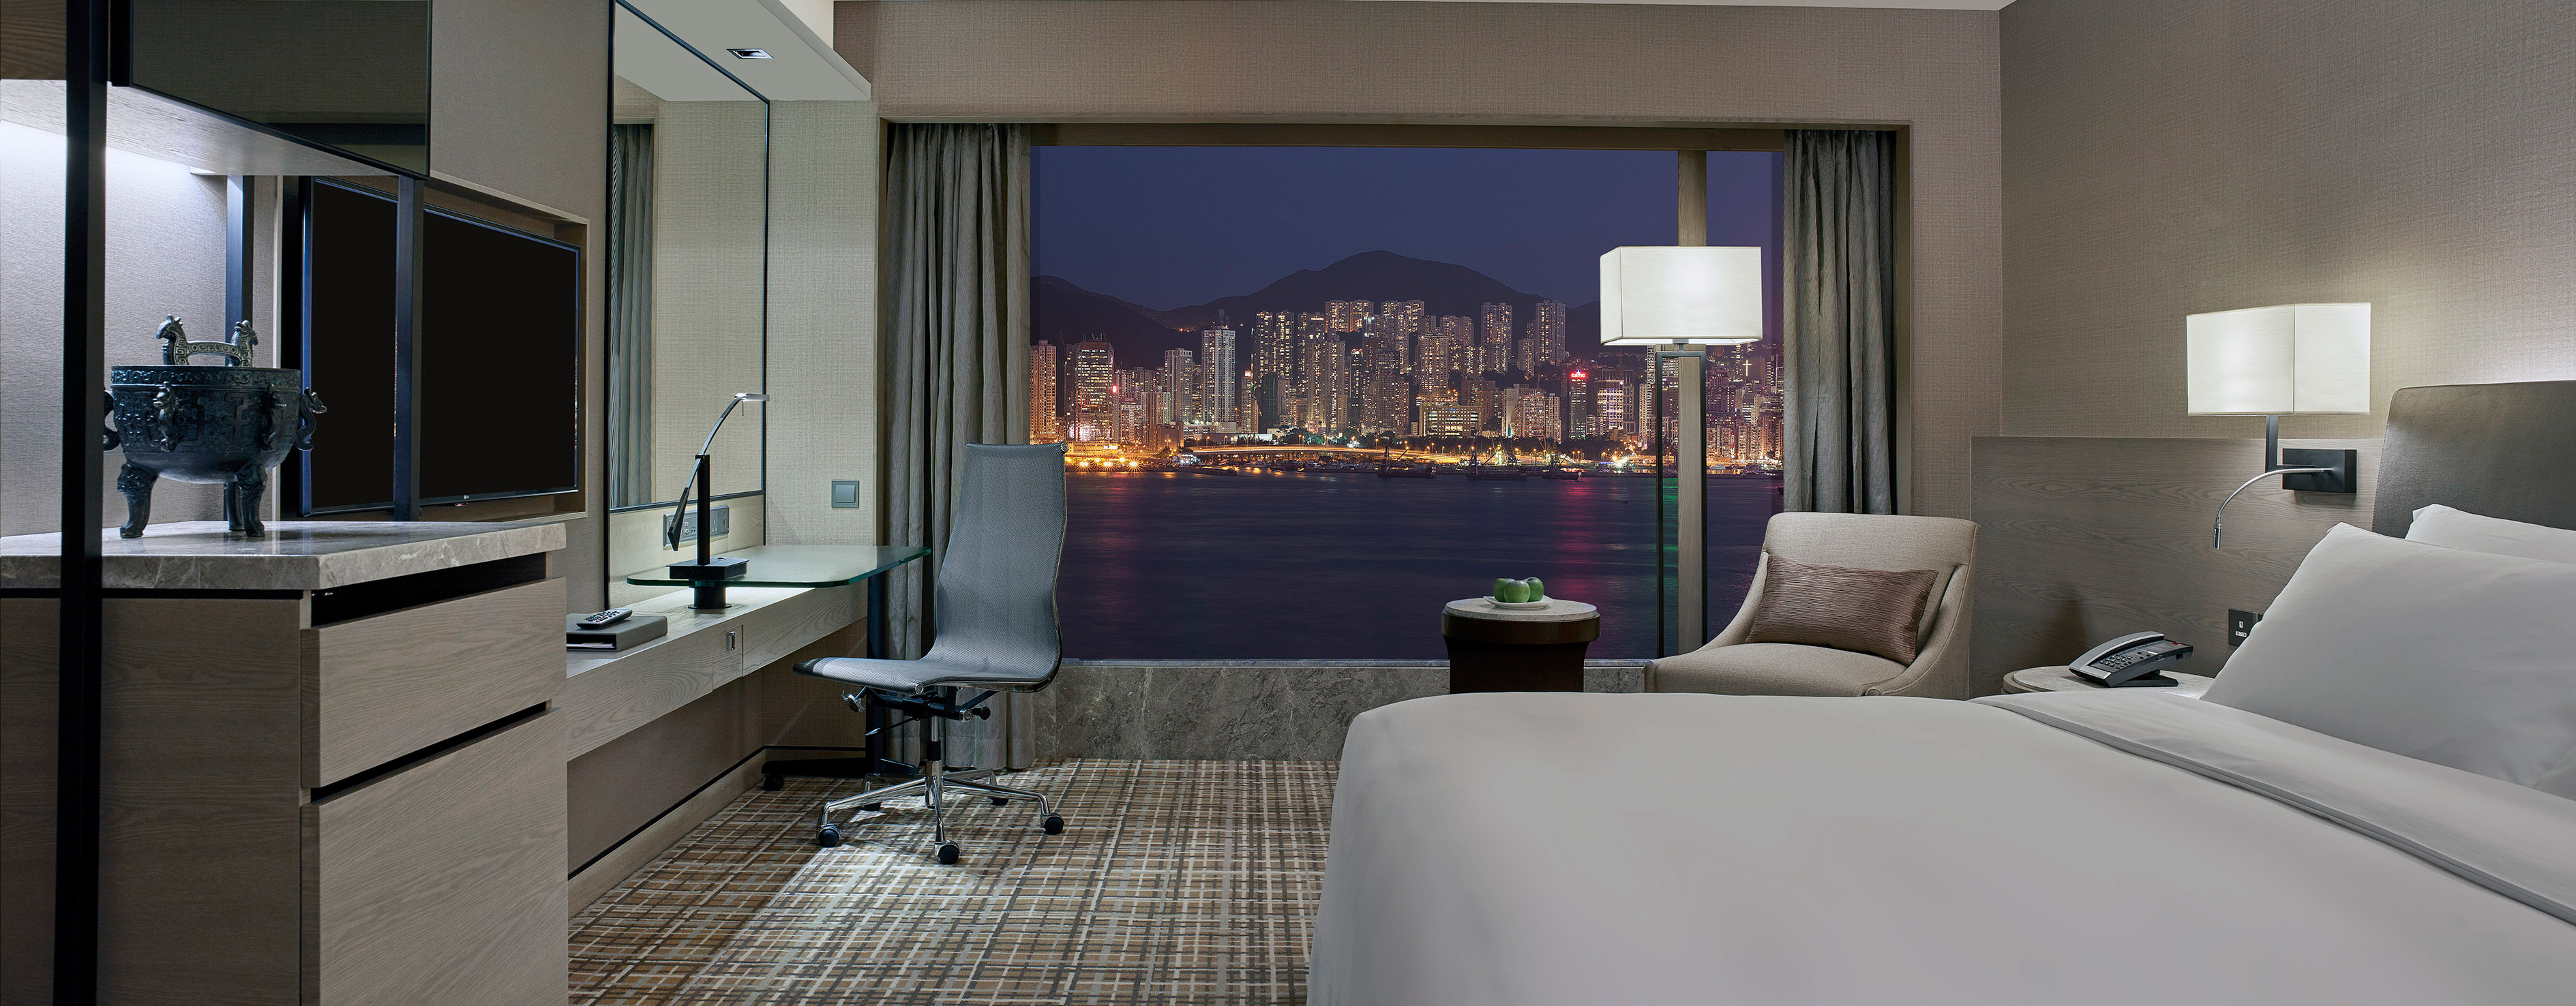 interior of the deluxe harbour view suite living room at the New World Millennium Hotel in Hong Kong showing a sofa across from a large flat screen television and large window